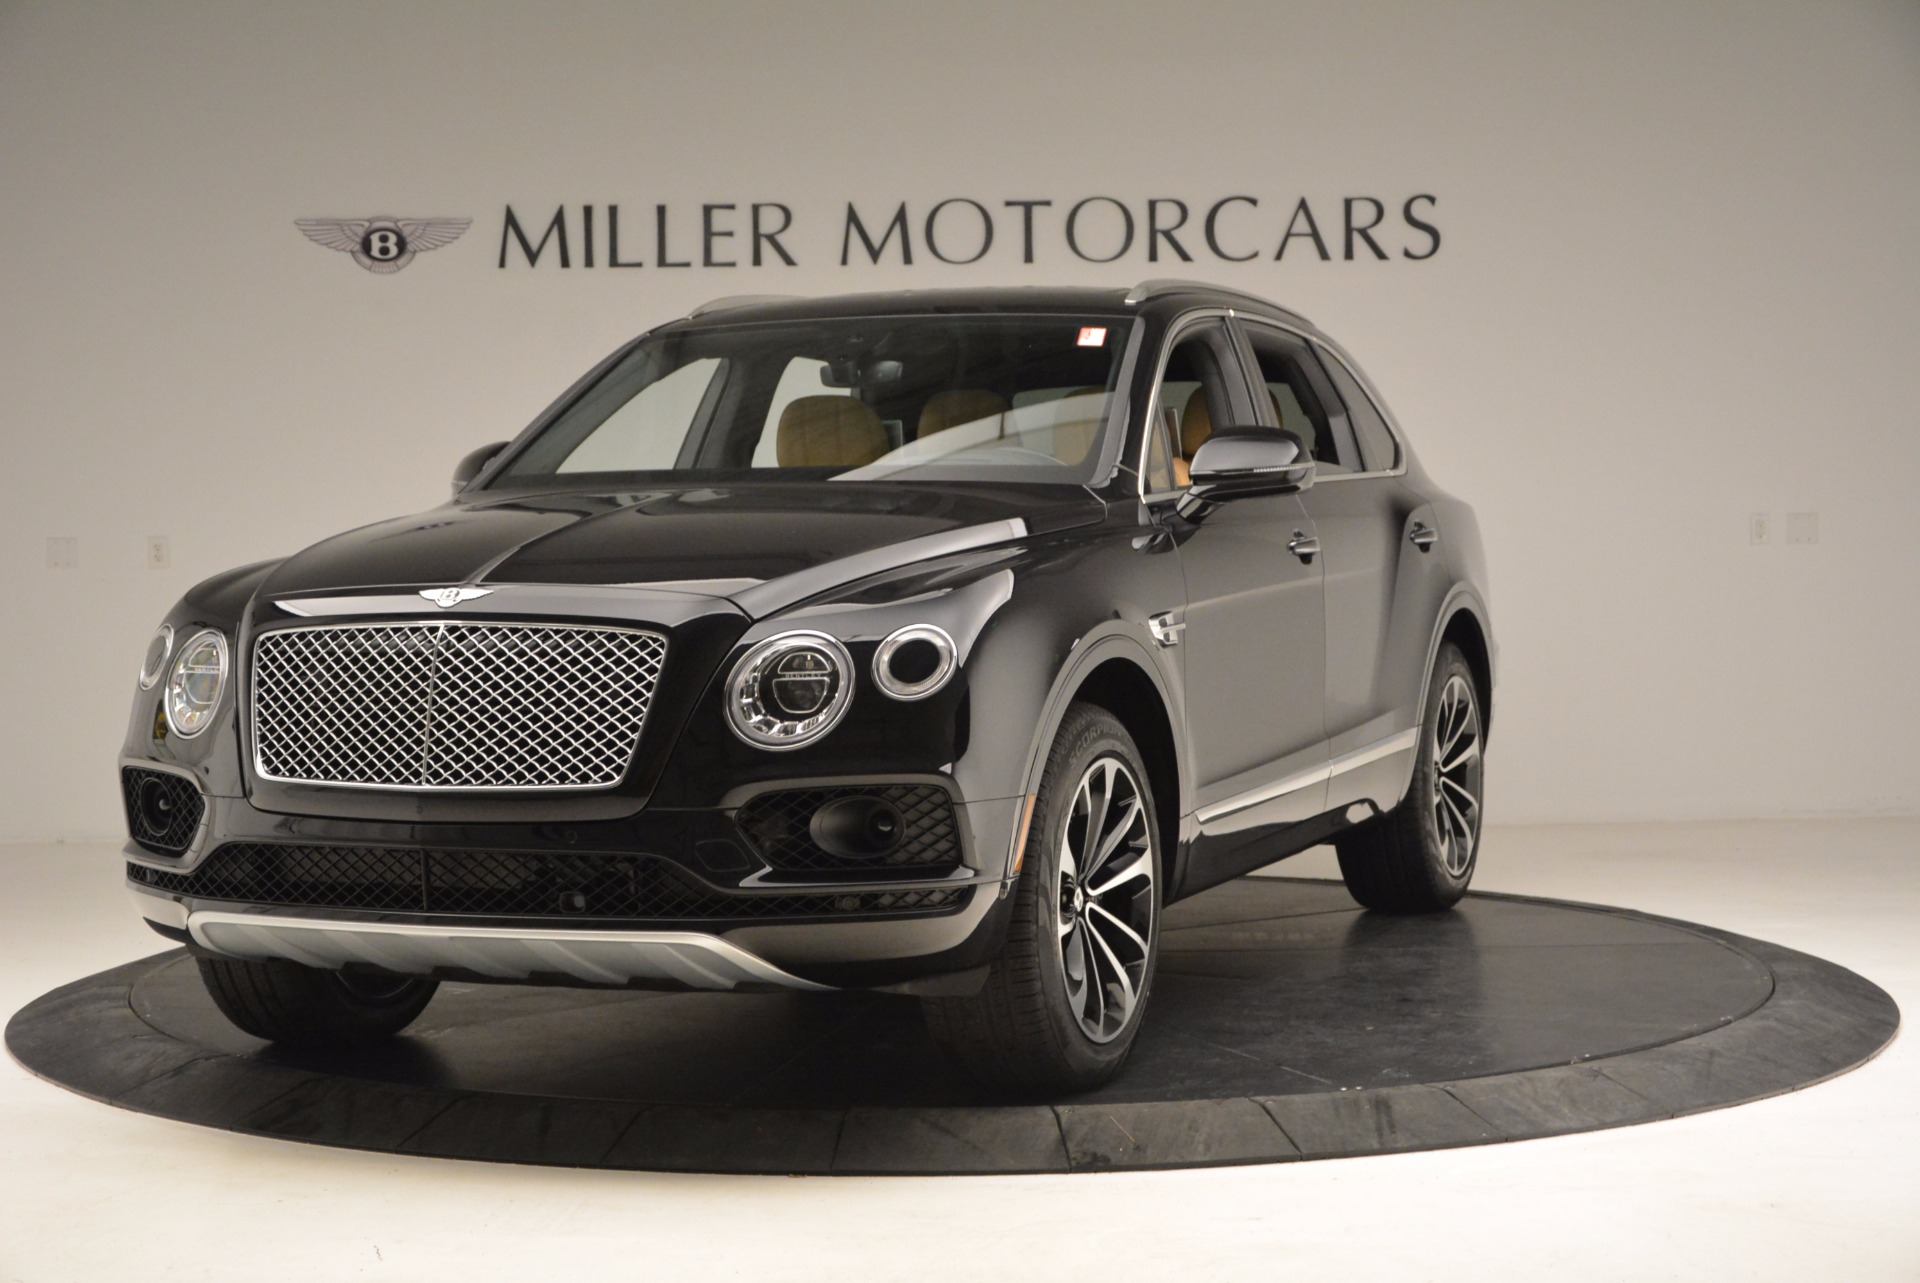 Used 2017 Bentley Bentayga for sale Sold at Rolls-Royce Motor Cars Greenwich in Greenwich CT 06830 1